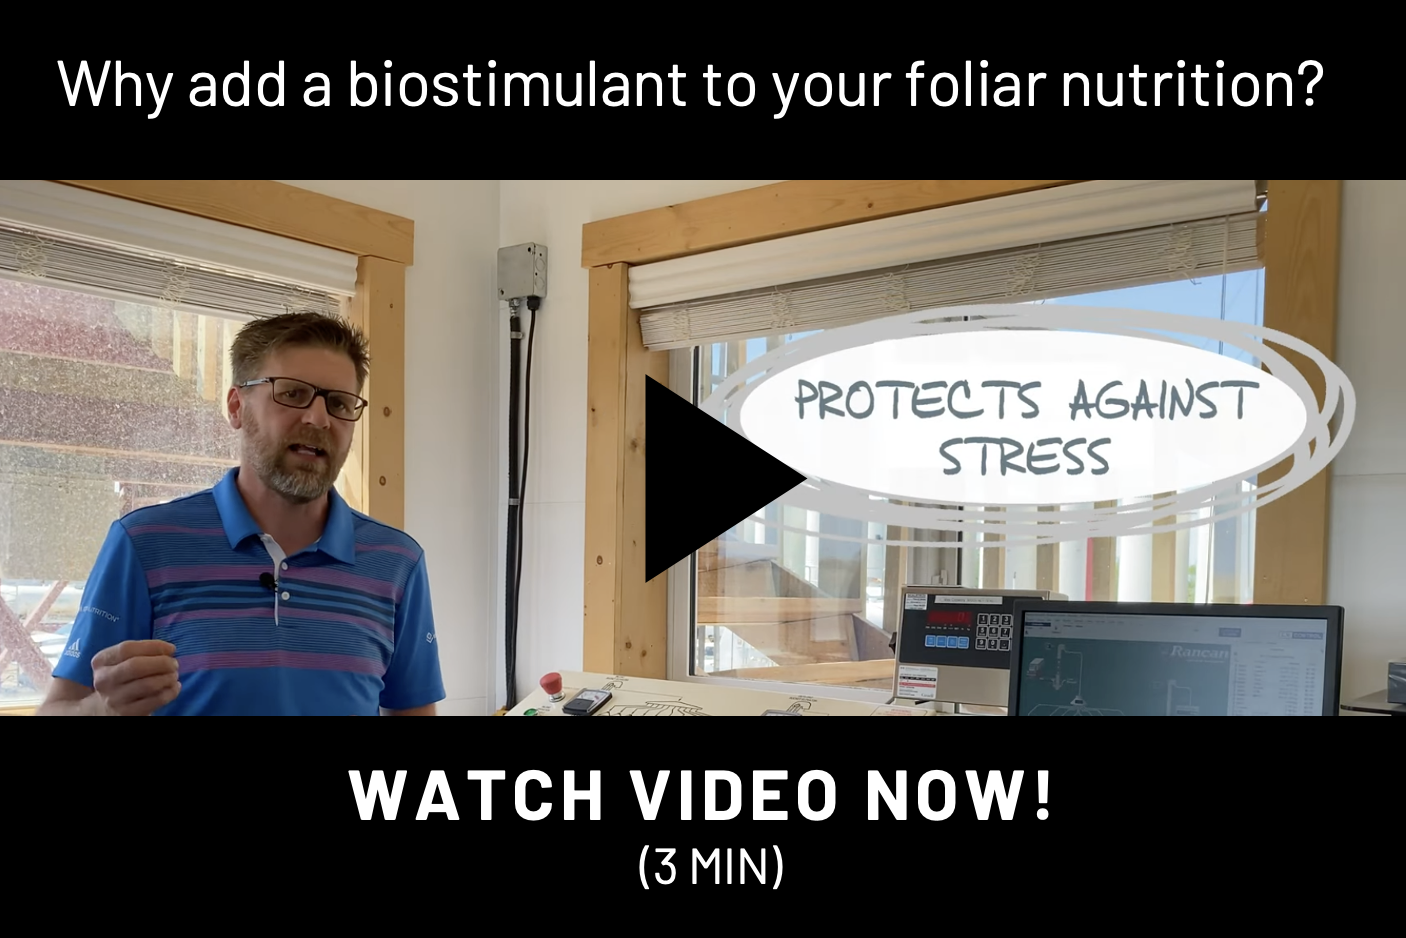 Crop stressed out? Here's how biostimulants can help.